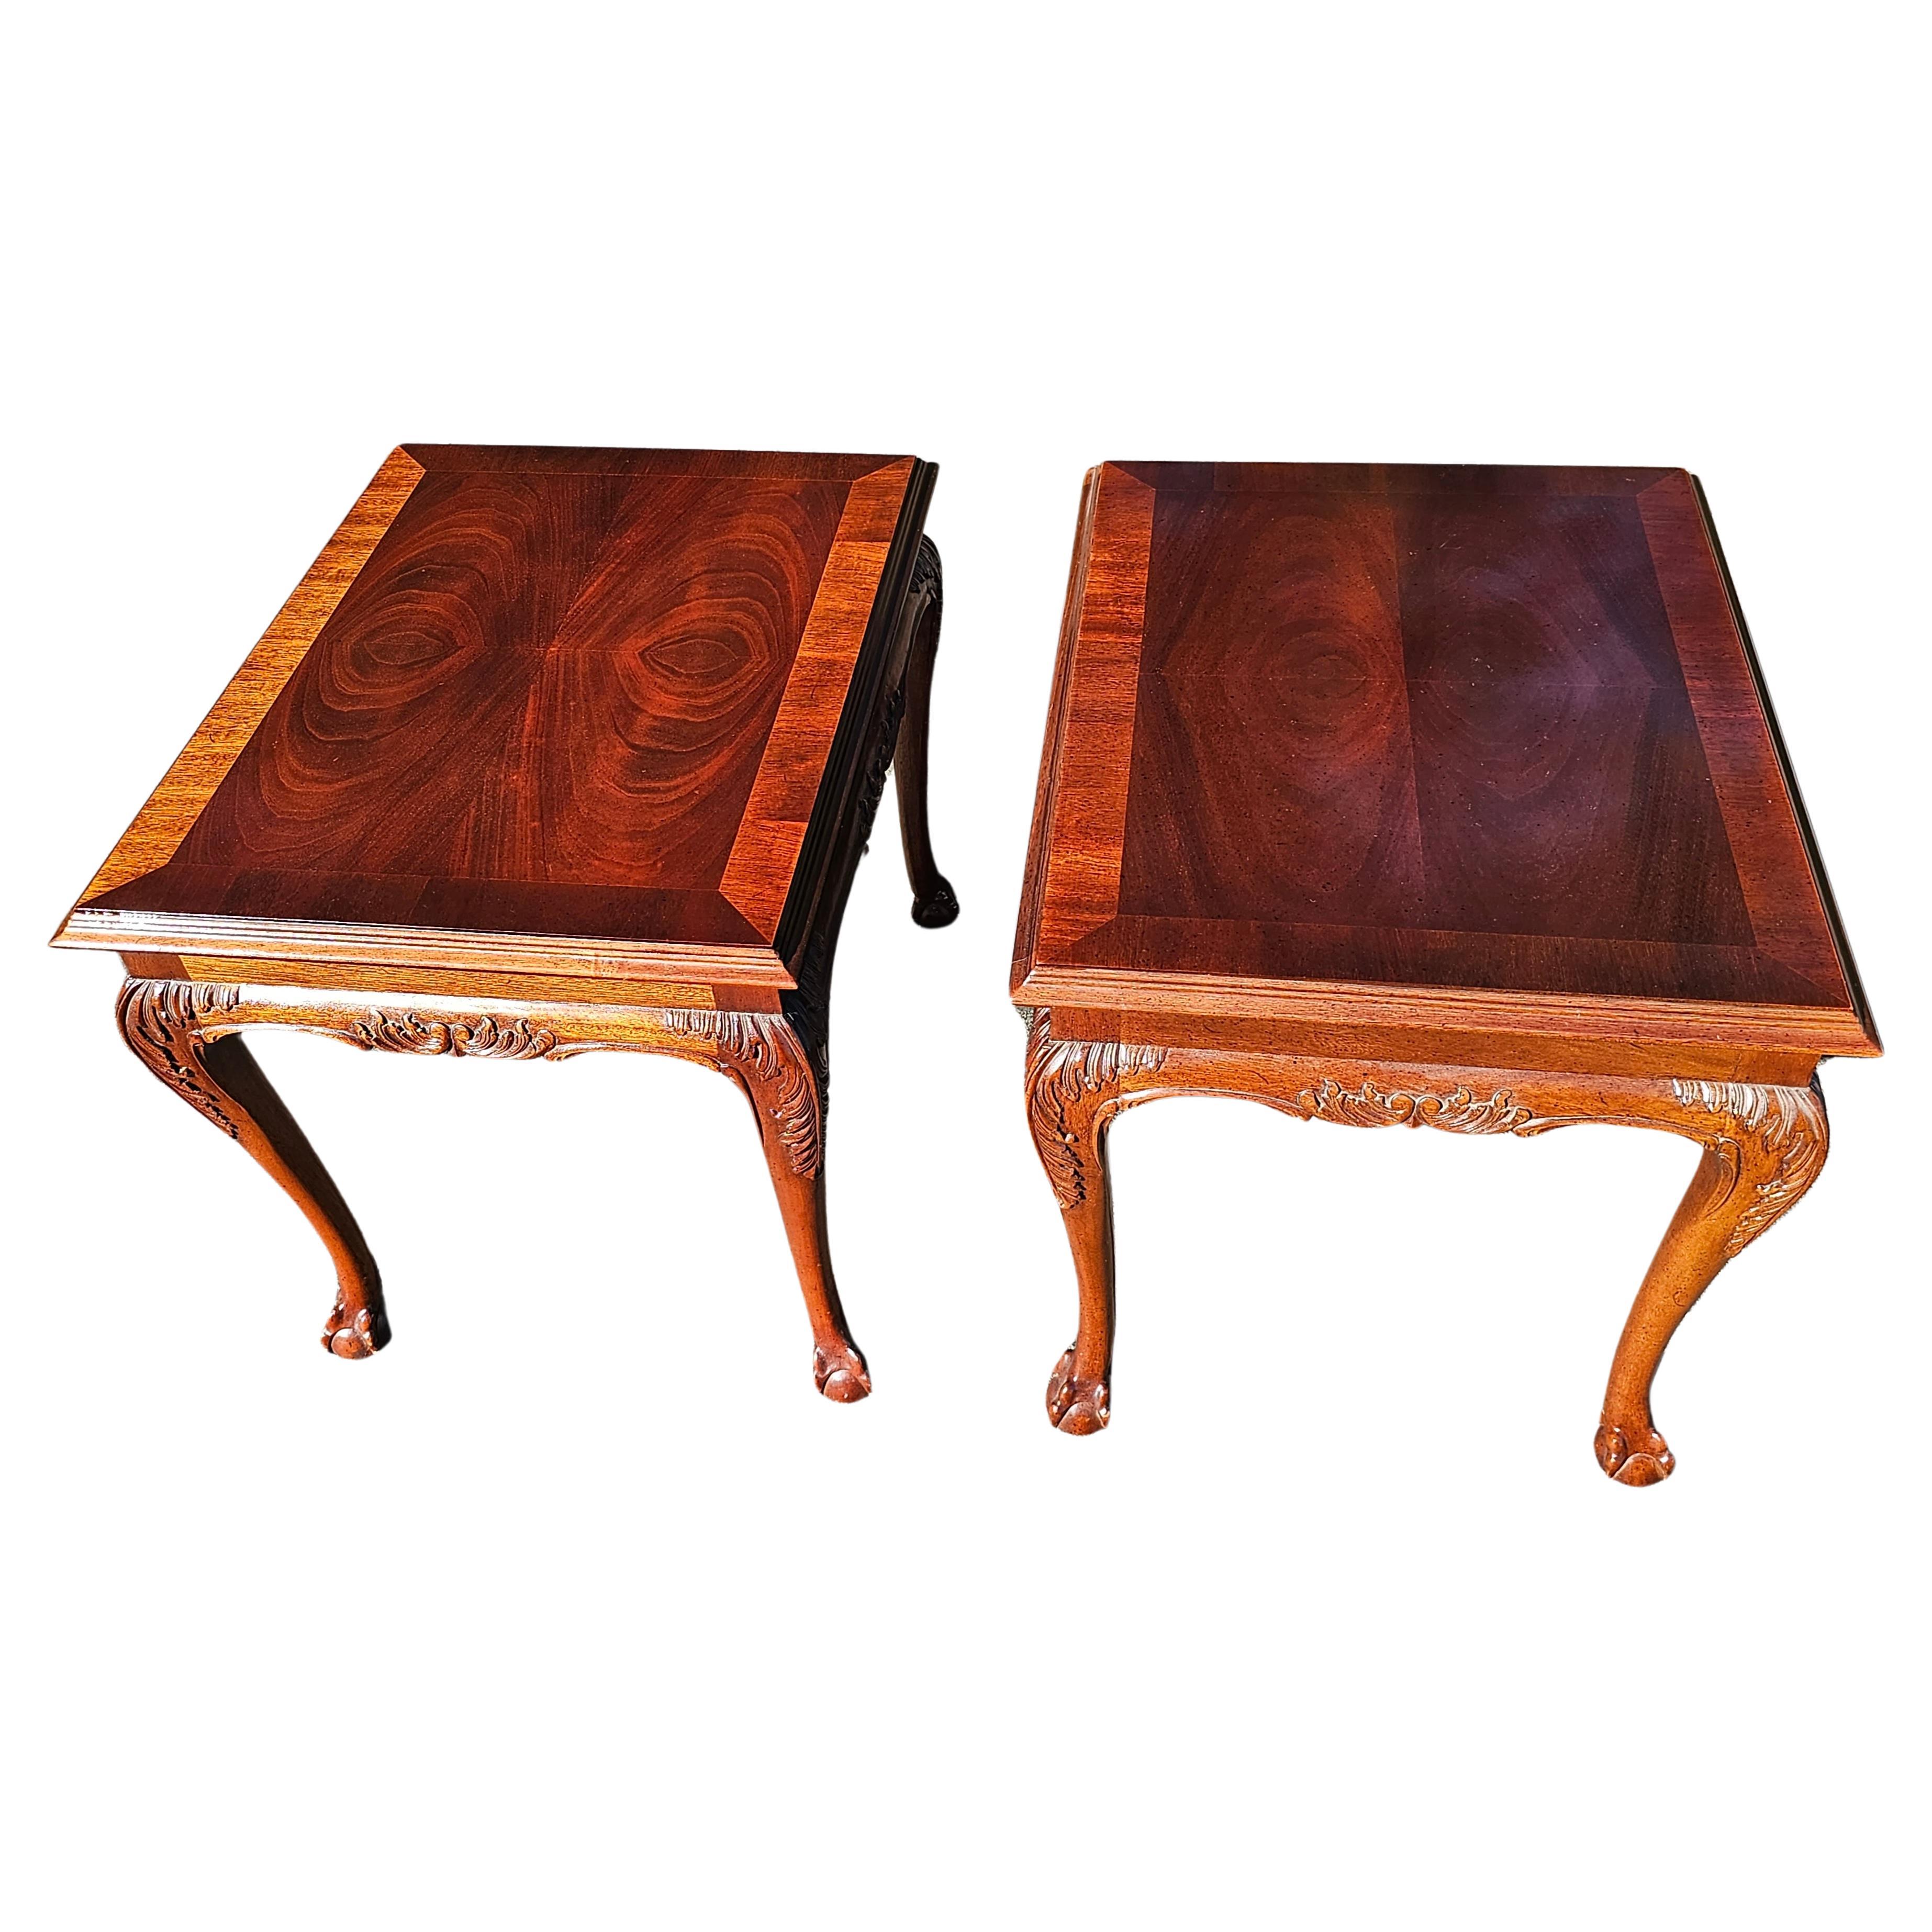 A well kept Pair of Lane Altavista Virginia Chippendale Carved Mahogany with Ball Claw Feet. Feature beautifully carved cabriole legs with acanthus leaves terminating with ball and claw feet. Banded top with swirl mahogany. 
Measure 22